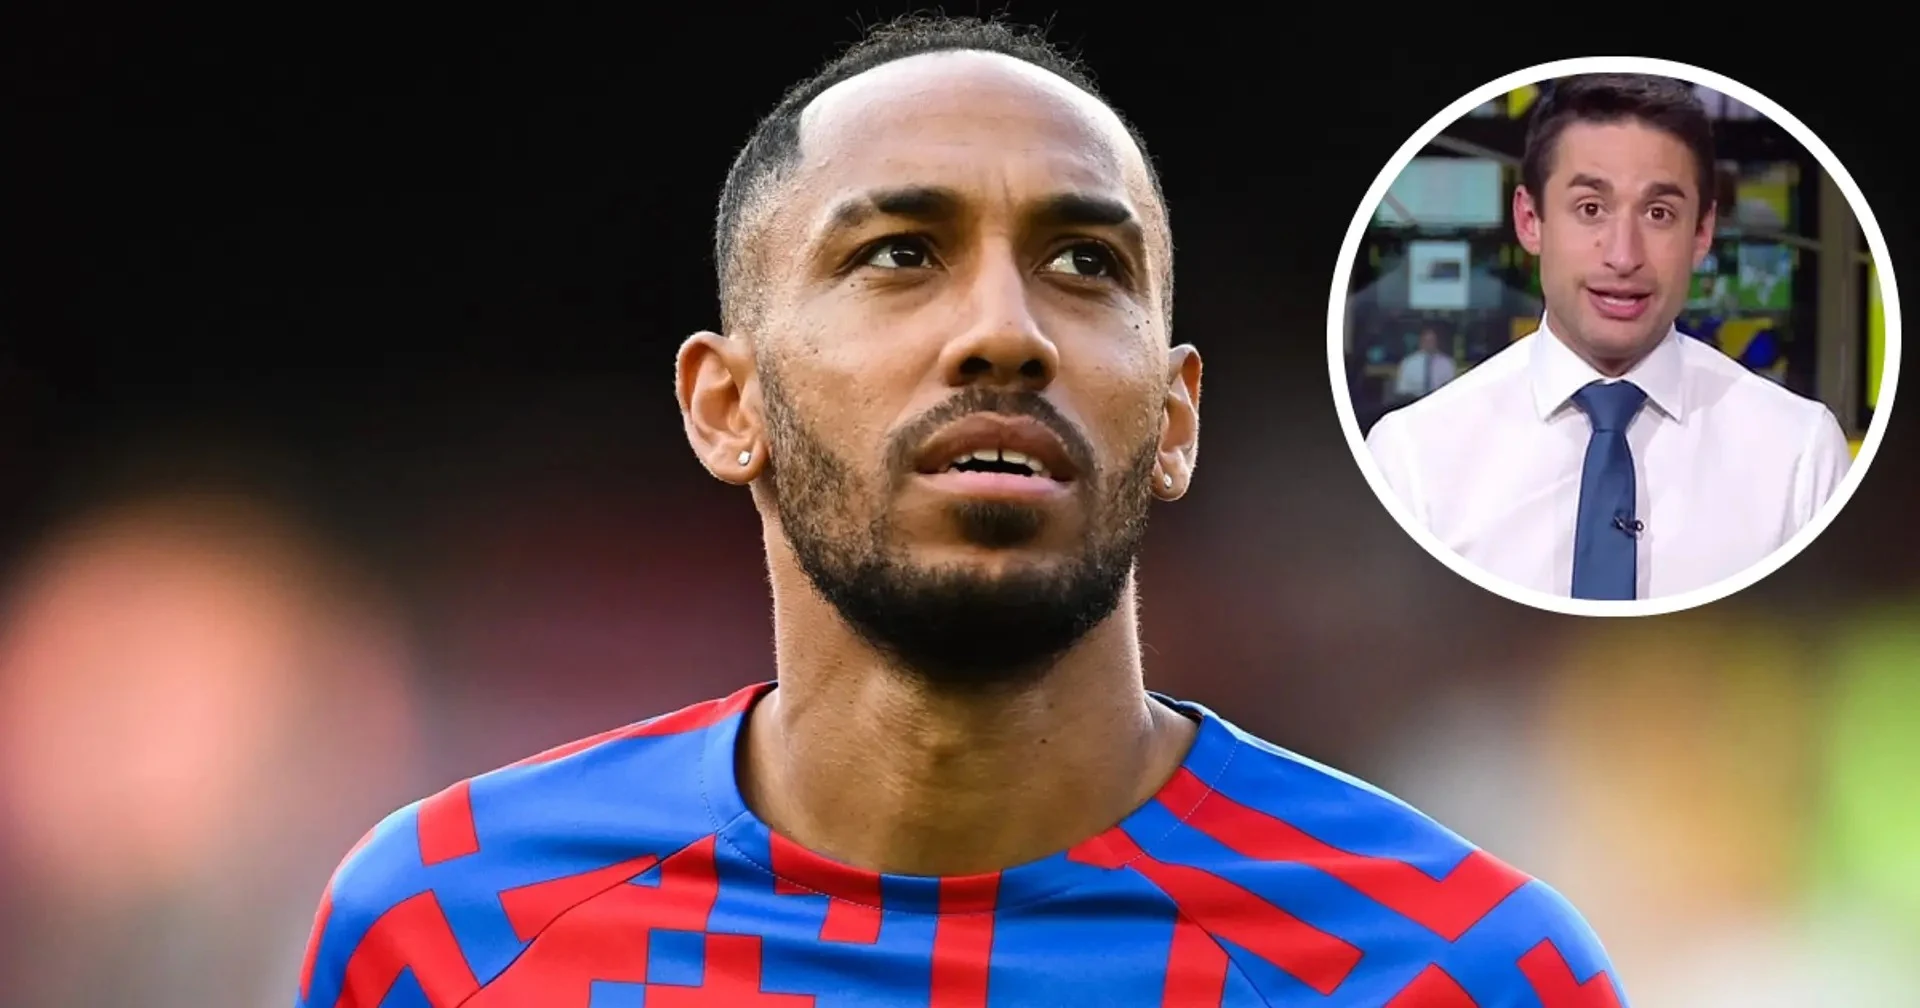 According to David Ornstein of The Athletic, Barcelona are in intensive talks with Chelsea over Pierre-Emerick Aubameyang's move.  The parties have still not reached an agreement over the transfer fee, with Blaugrana demanding more than what the Blues are ready to pay.  ADVERTISEMENT The move is further 'complicated' by the consequences of a recent armed robbery. The intruders who robbed Auba broke his jaw, so the Gabonese could miss up to 3 weeks of football because of that.  Chelsea need a striker now, and Auba picking up an injury could see the Blues turning their attention away from him, although it is not certain at the moment.  Ornstein also reports that the new solution is a season-long loan for Auba. The clubs are currently discussing this option.  Source: David Ornstein